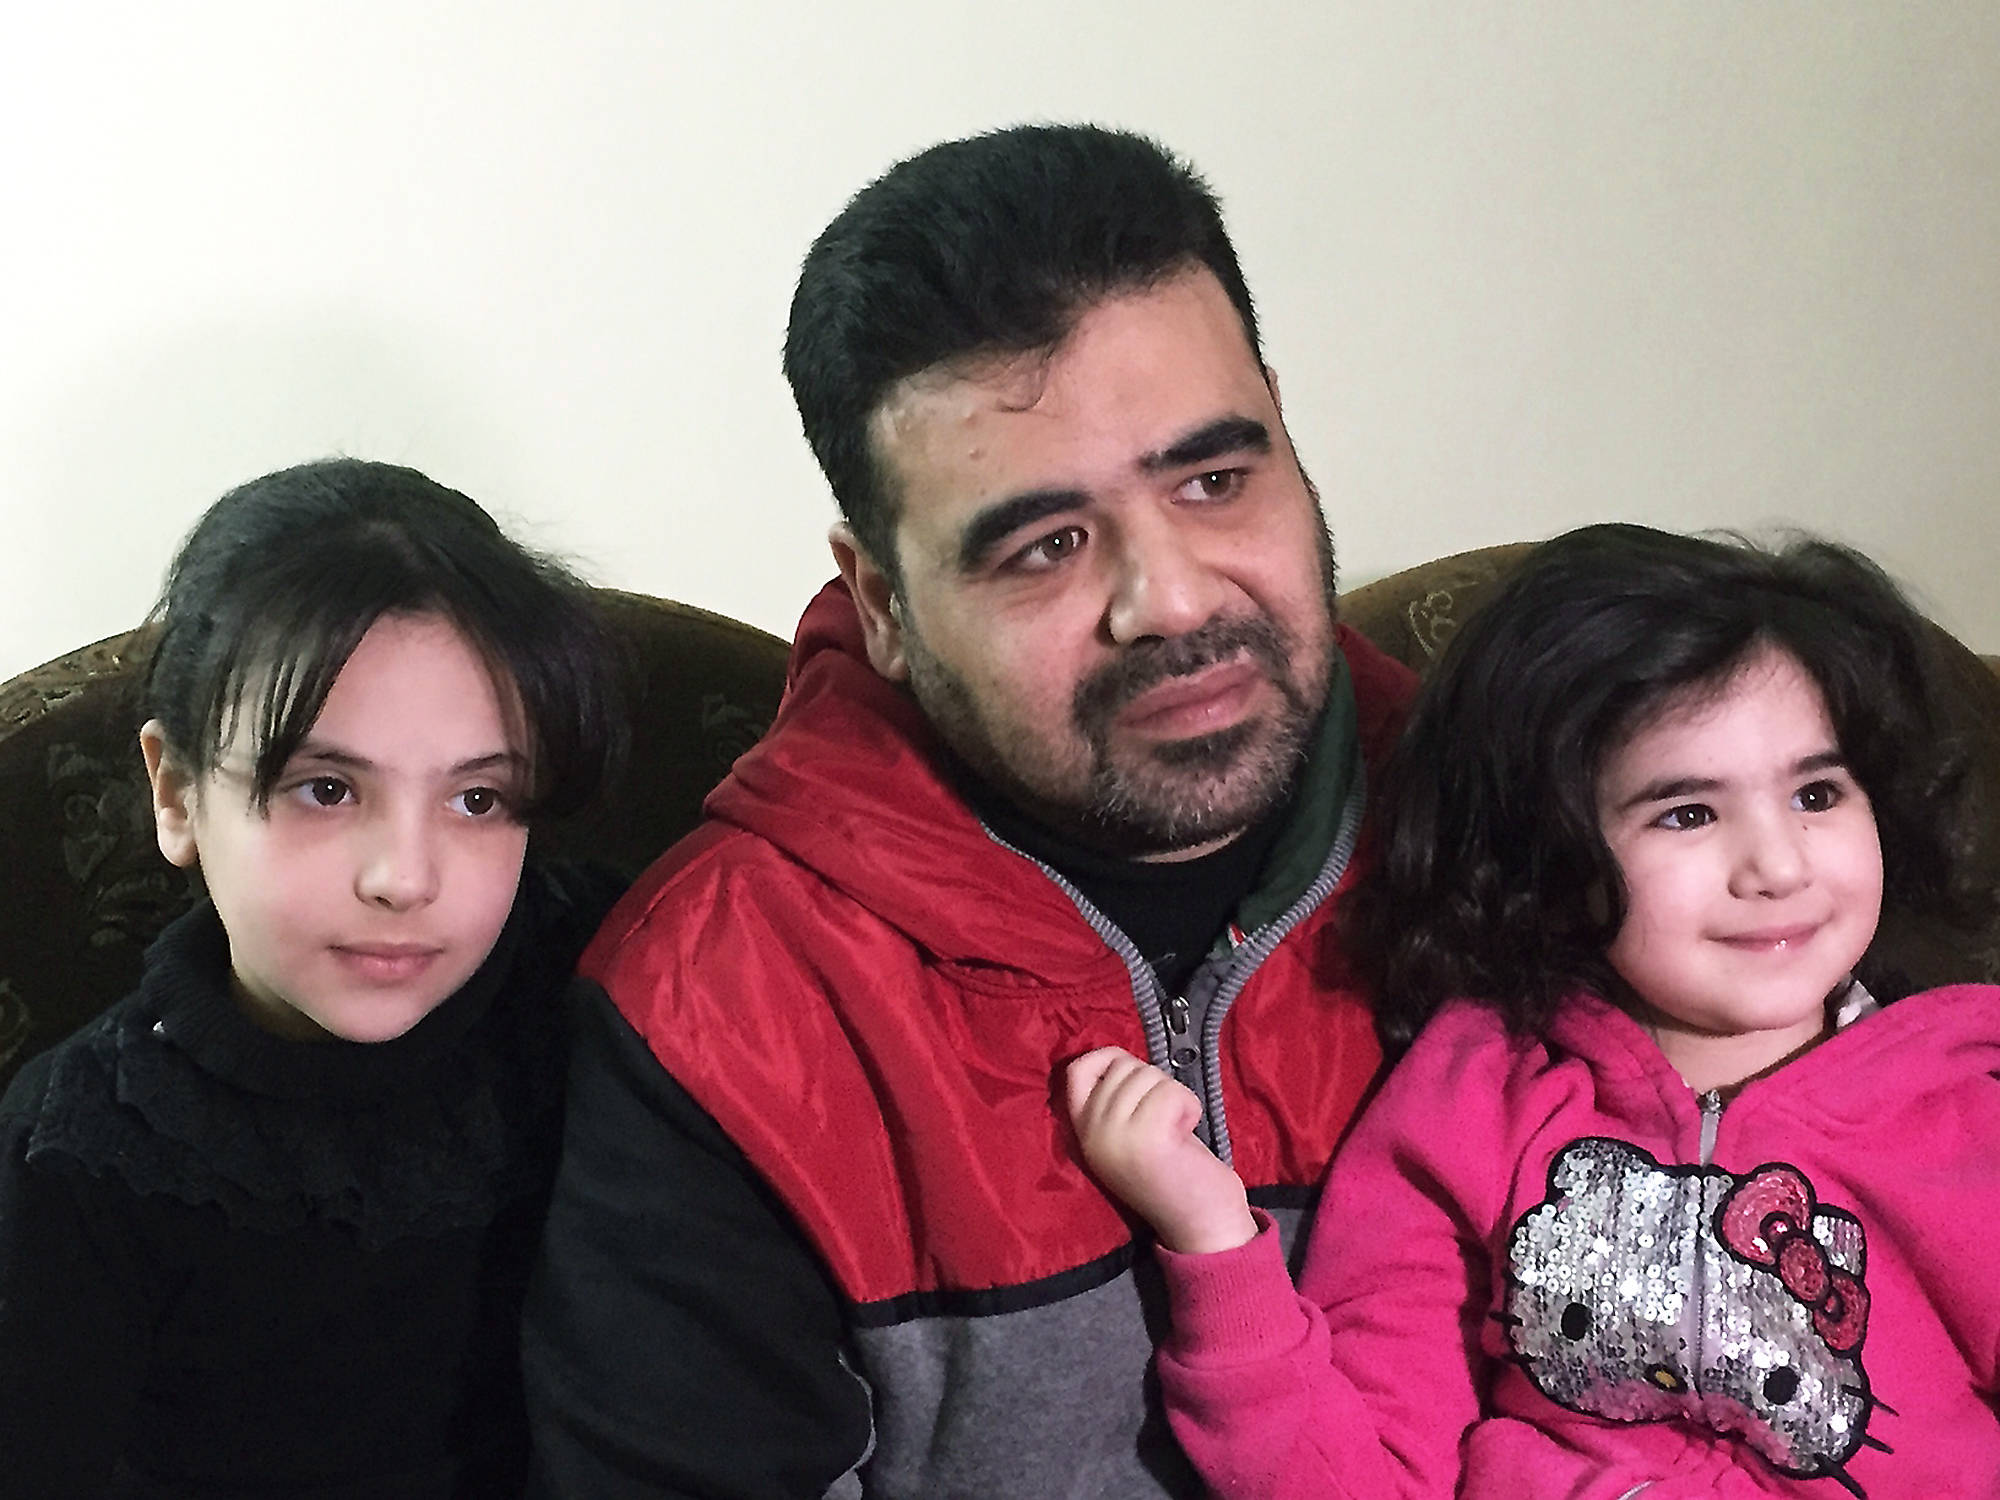 Karin Laub/The Associated Press                                Syrian refugee Mahmoud Mansour, 43, is shown in this photo, taken March 6 in Amman, with his daughters Ruba, 9, and Sahar, 3. Mansour, who has been undergoing vetting for resettlement to the U.S. for the past year, says he was devastated by President Donald Trump’s travel ban and remains confused about how the revised version could affect his hopes for future in the U.S.